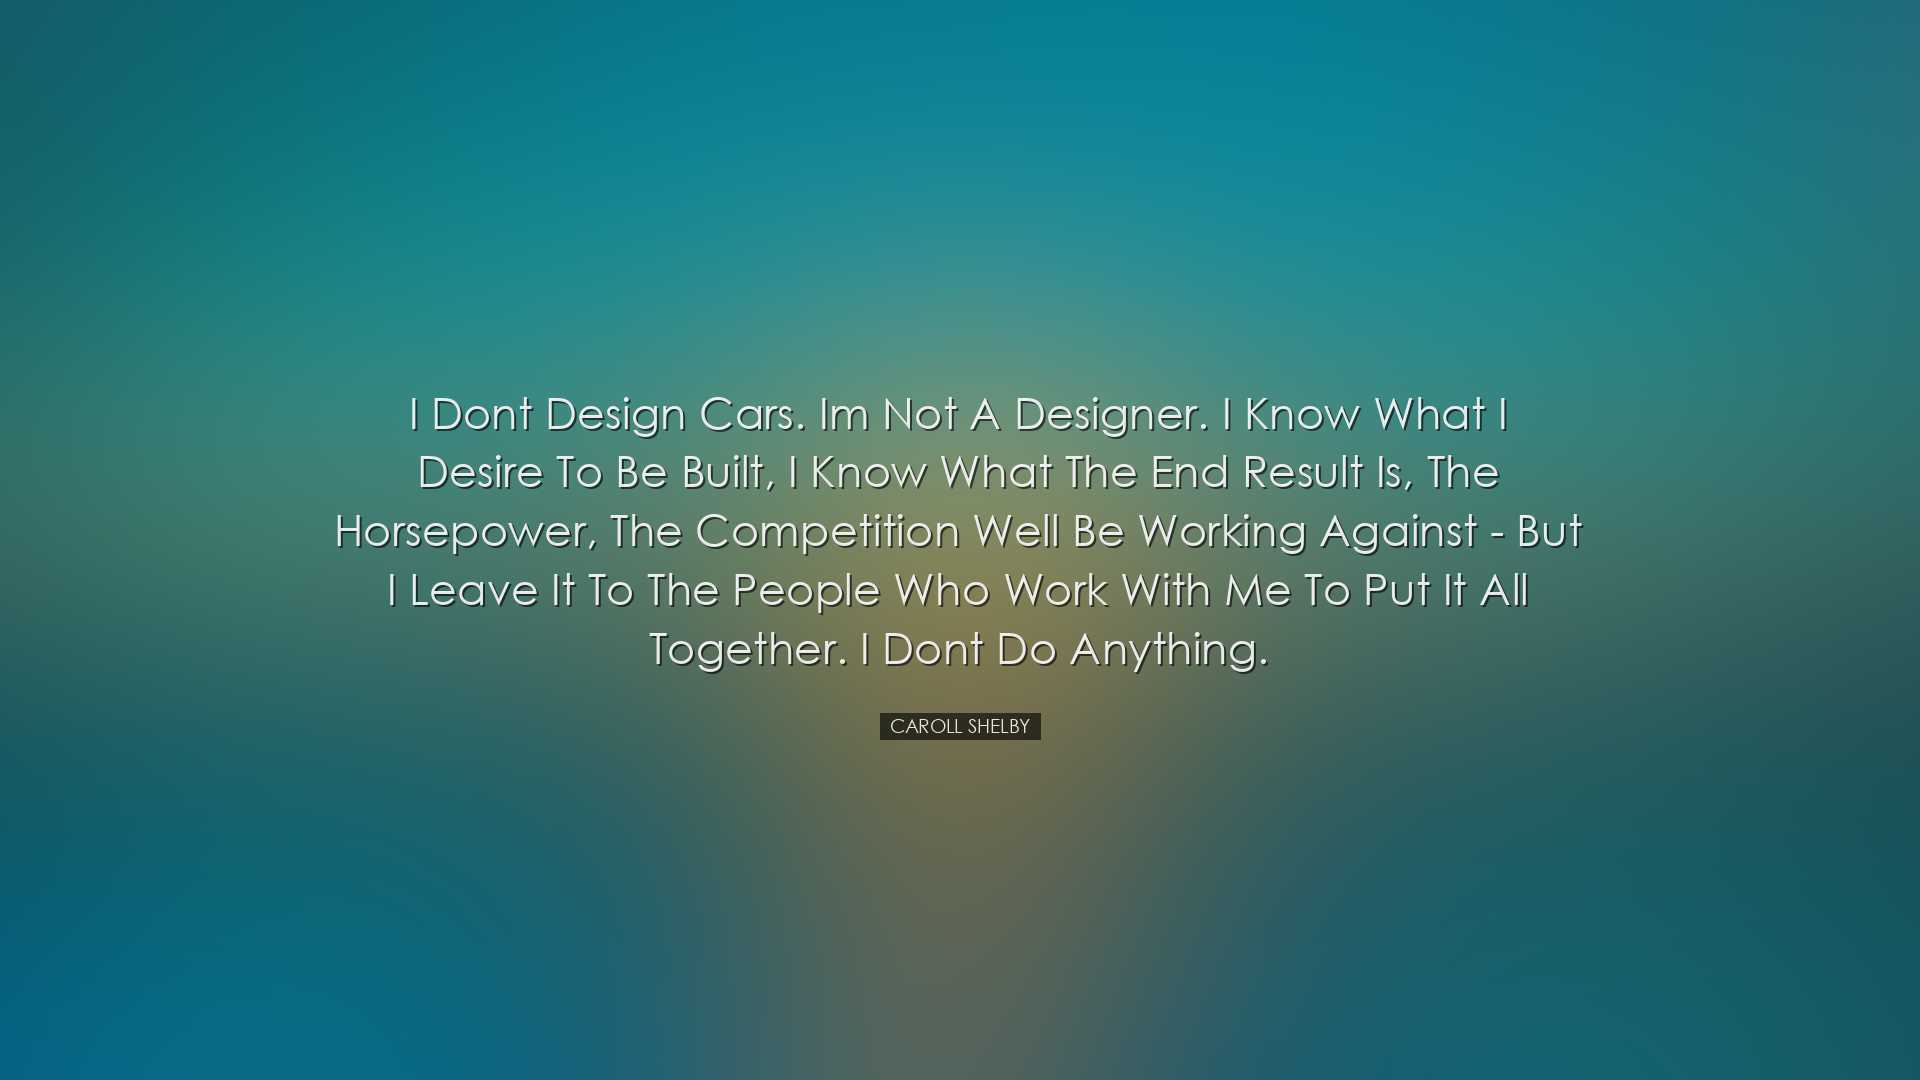 I dont design cars. Im not a designer. I know what I desire to be